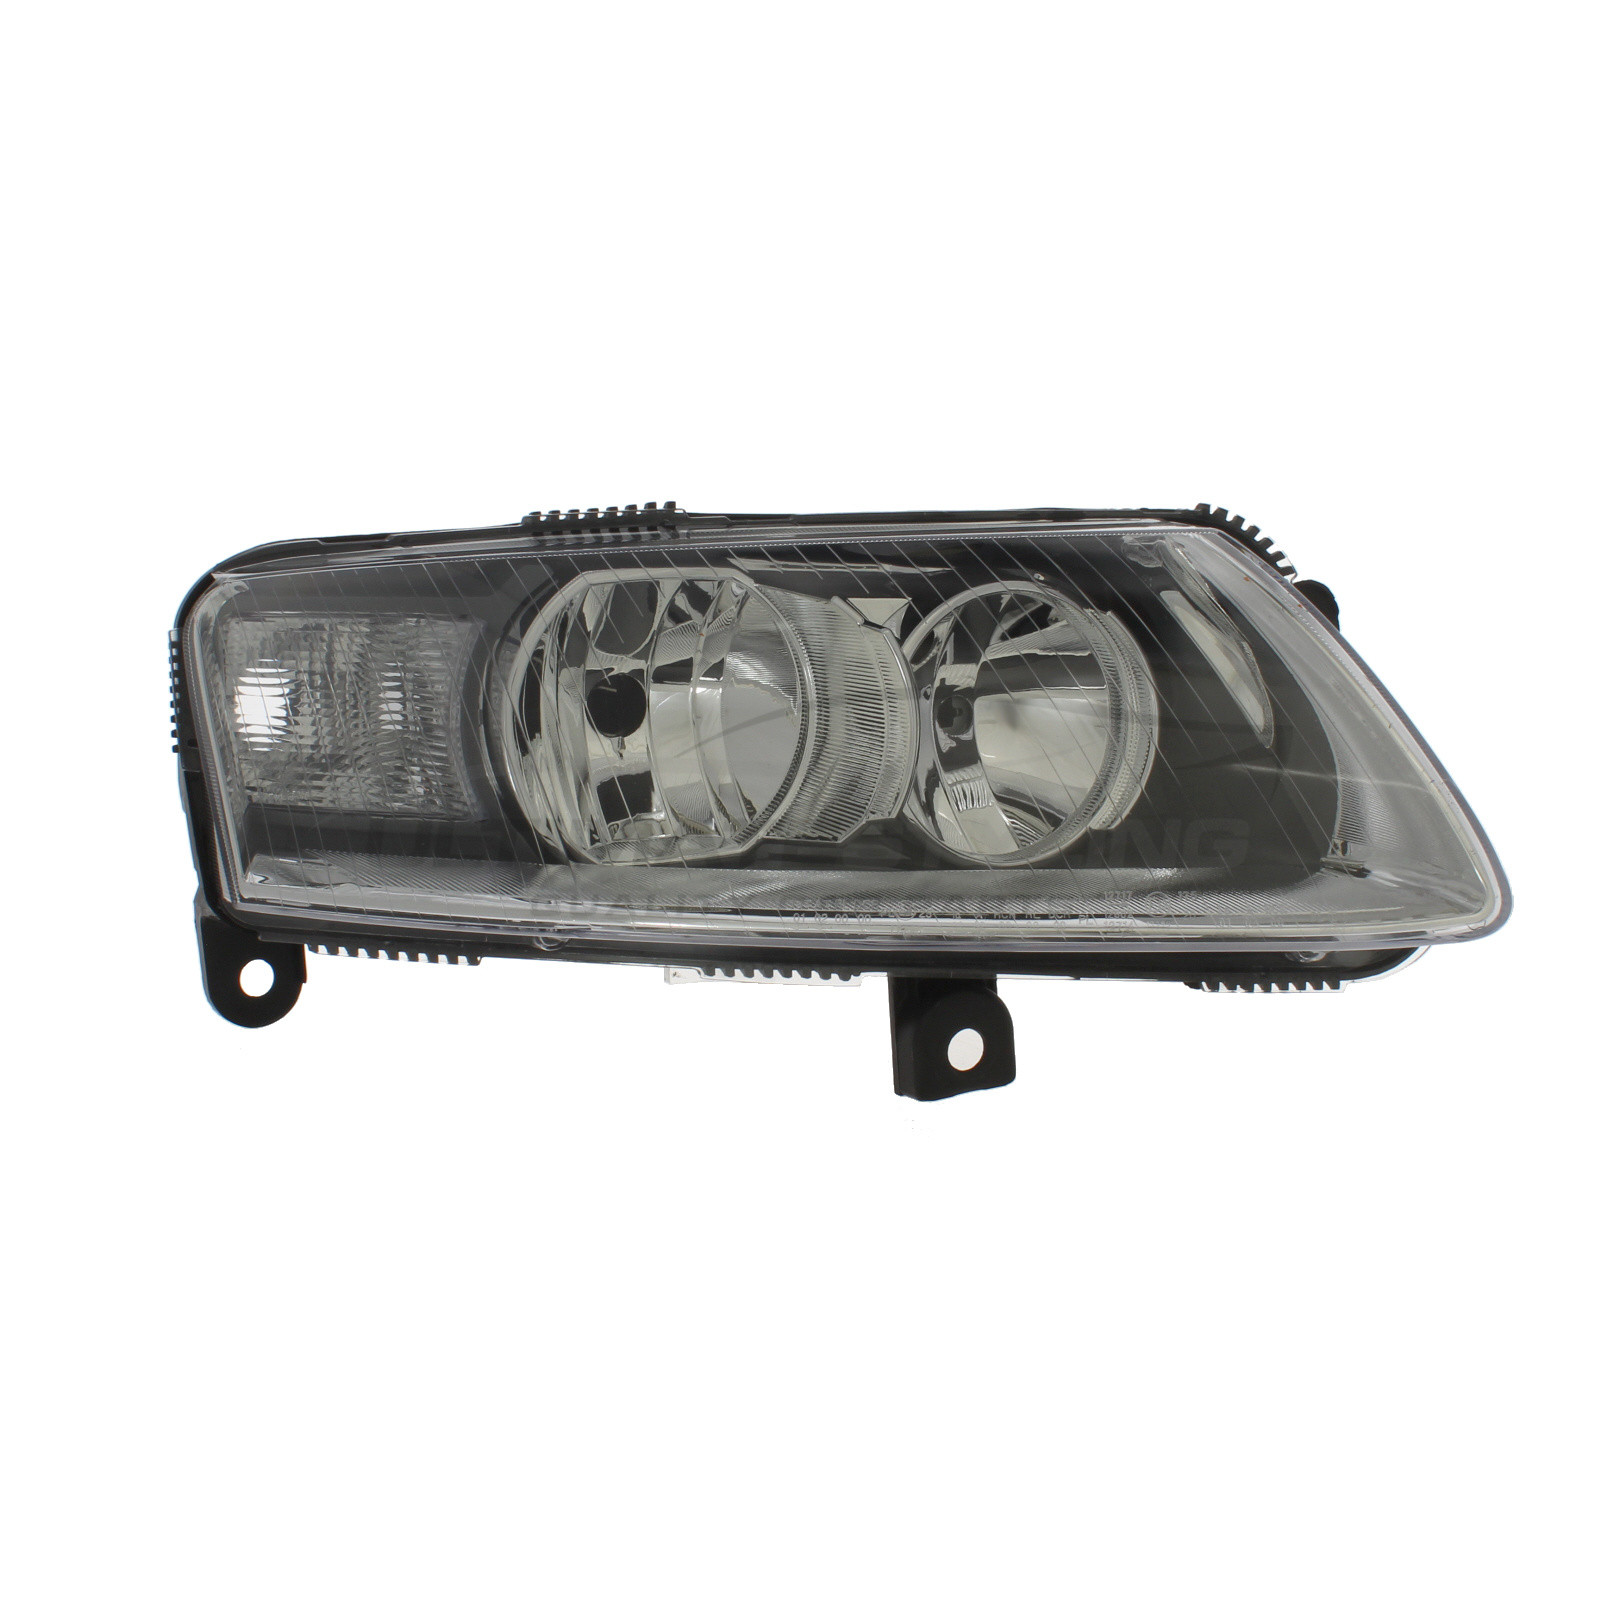 Audi A6 2004-2008, Allroad 2006-2009 Halogen, Electric Without Motor, Chrome Headlight / Headlamp Drivers Side (RH)